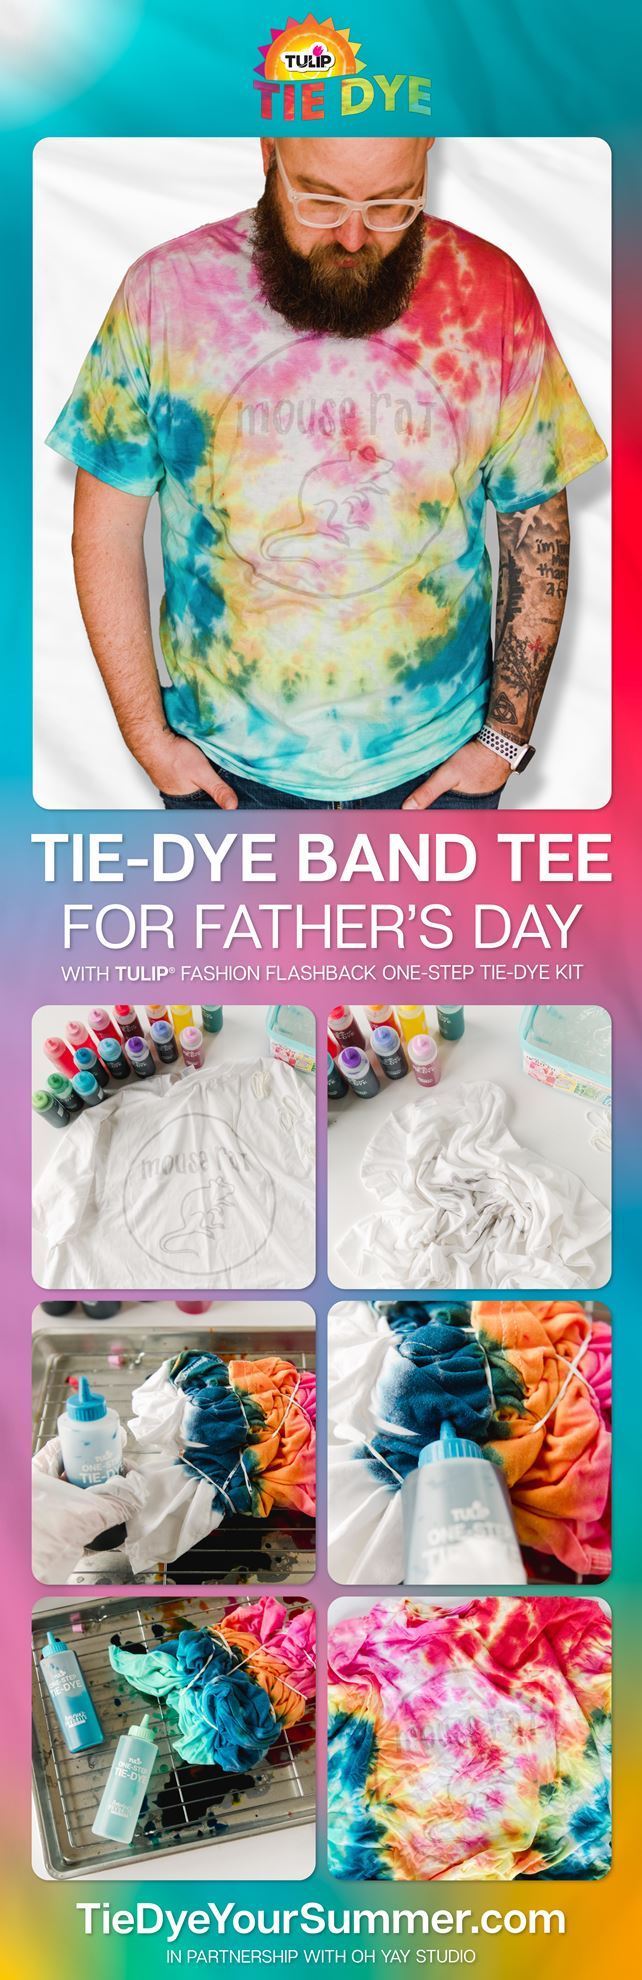 Homemade Father’s Day Gift: Tie-Dye Band Tee